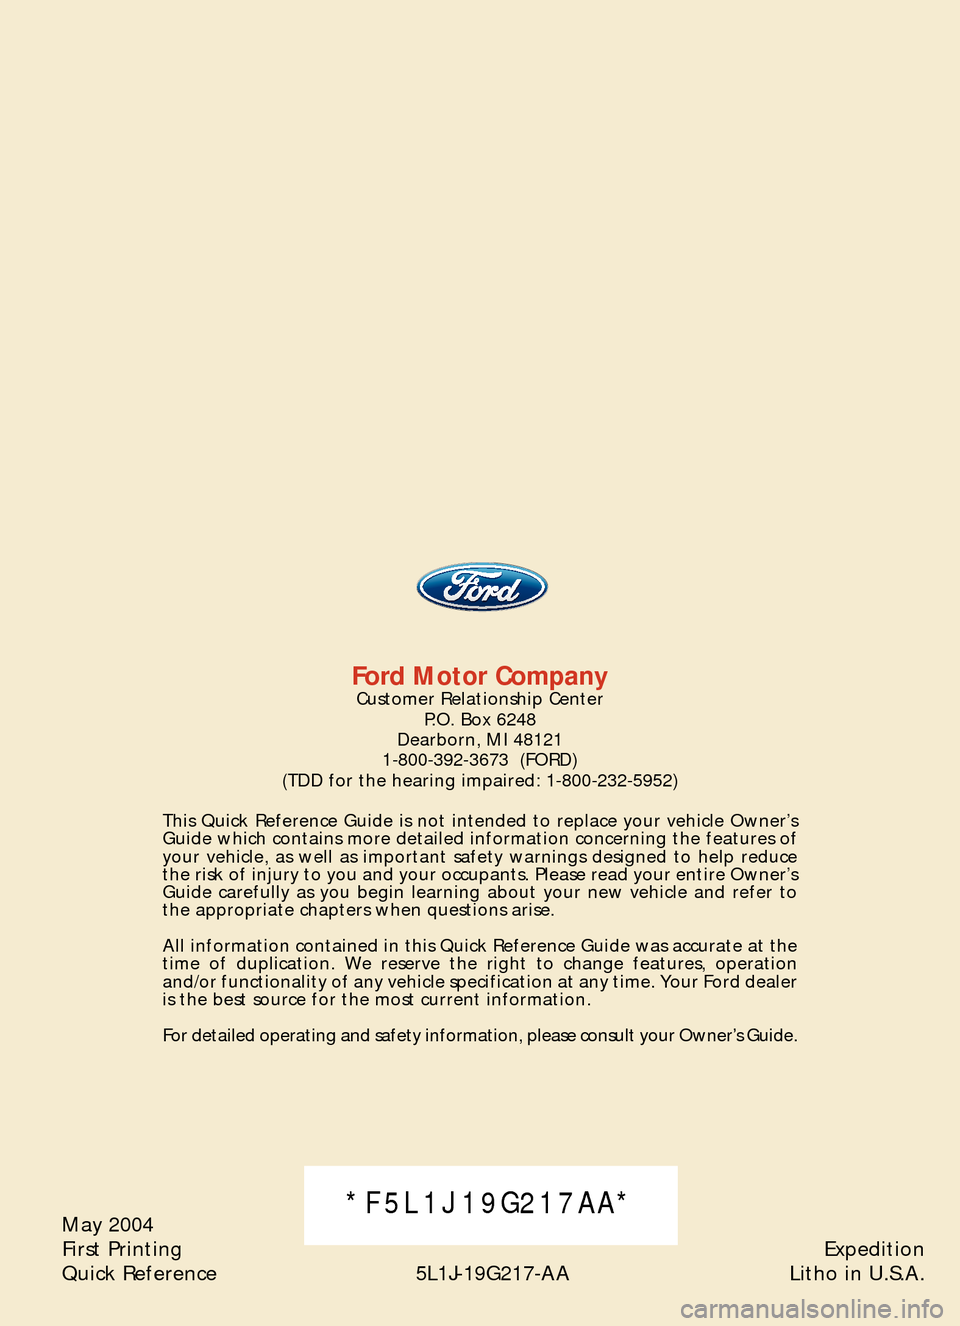 FORD EXPEDITION 2005 2.G Quick Reference Guide May 2004
First Printing
Quick Reference 5L1J�19G217�AAExpedition
Litho in U.S.A.*F5L1J19G217AA*
Ford Motor CompanyCustomer Relationship Center
P.O. Box 6248
Dearborn, MI 48121
1�800�392�3673  (FORD)
(